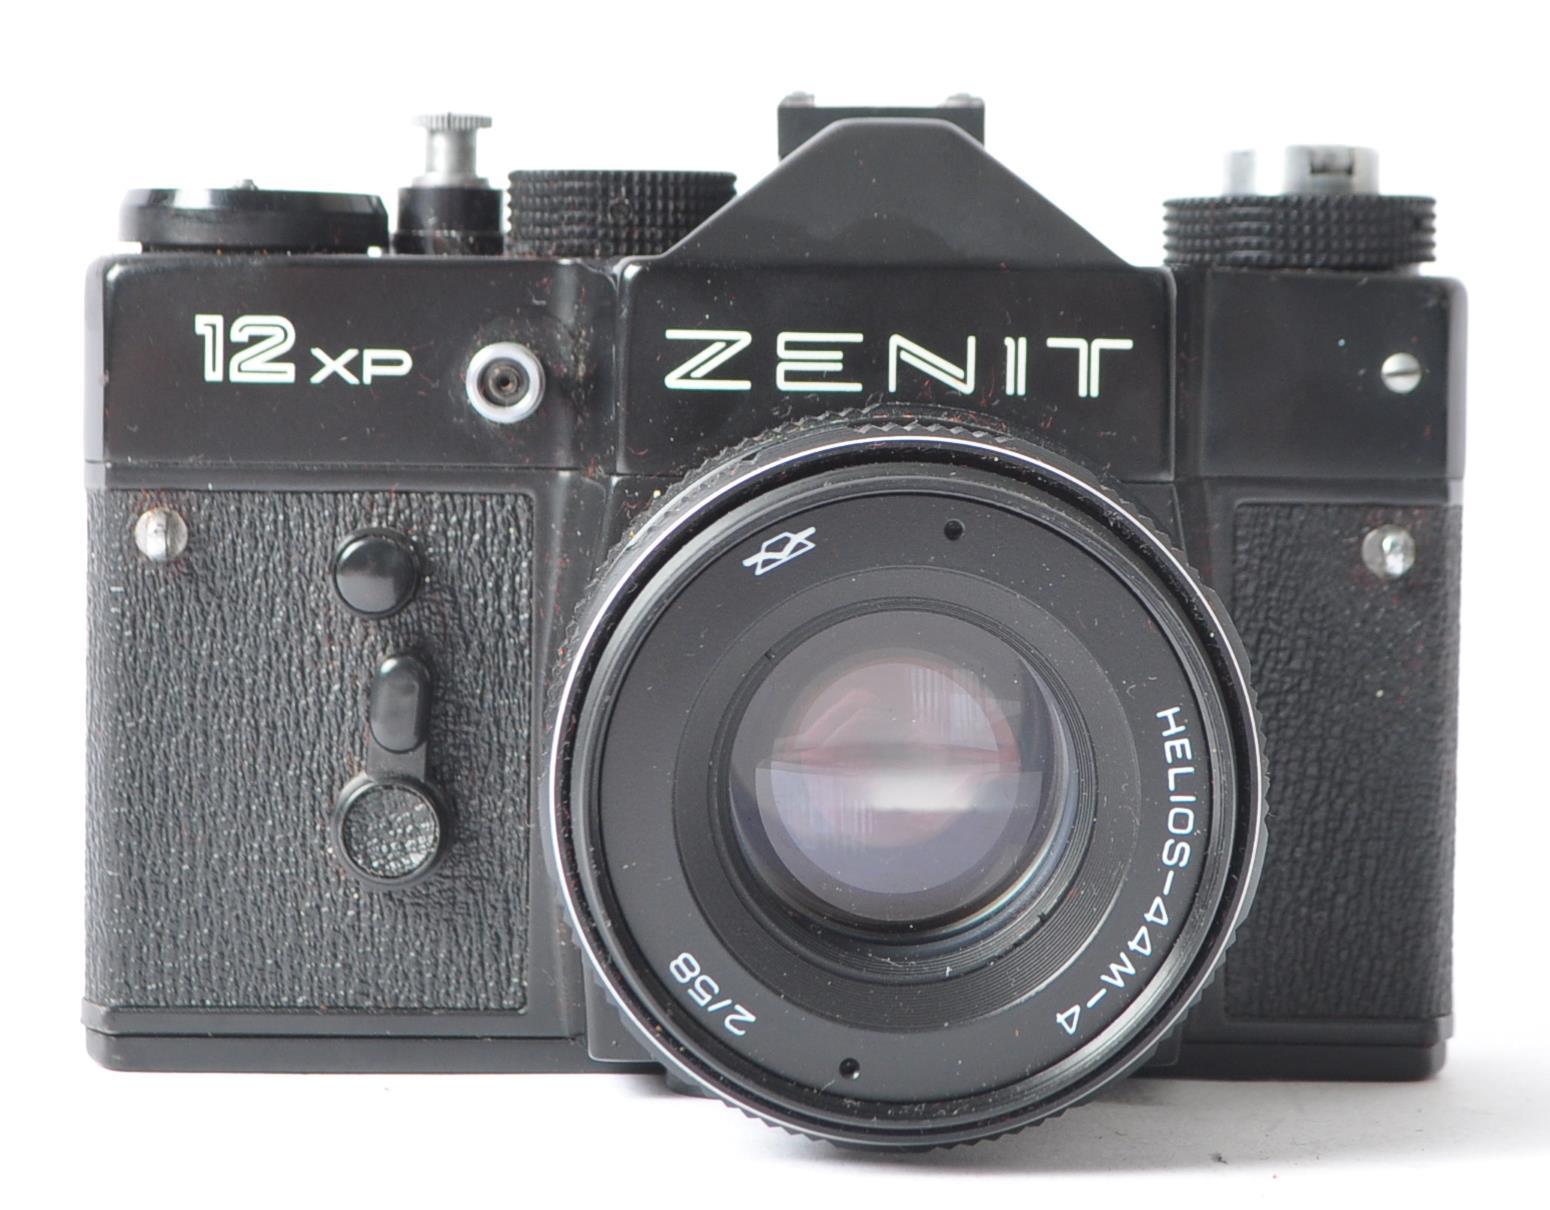 LATE 20TH CENTURY ZENIT 12 XP 35MM SLR CAMERA - Image 2 of 4